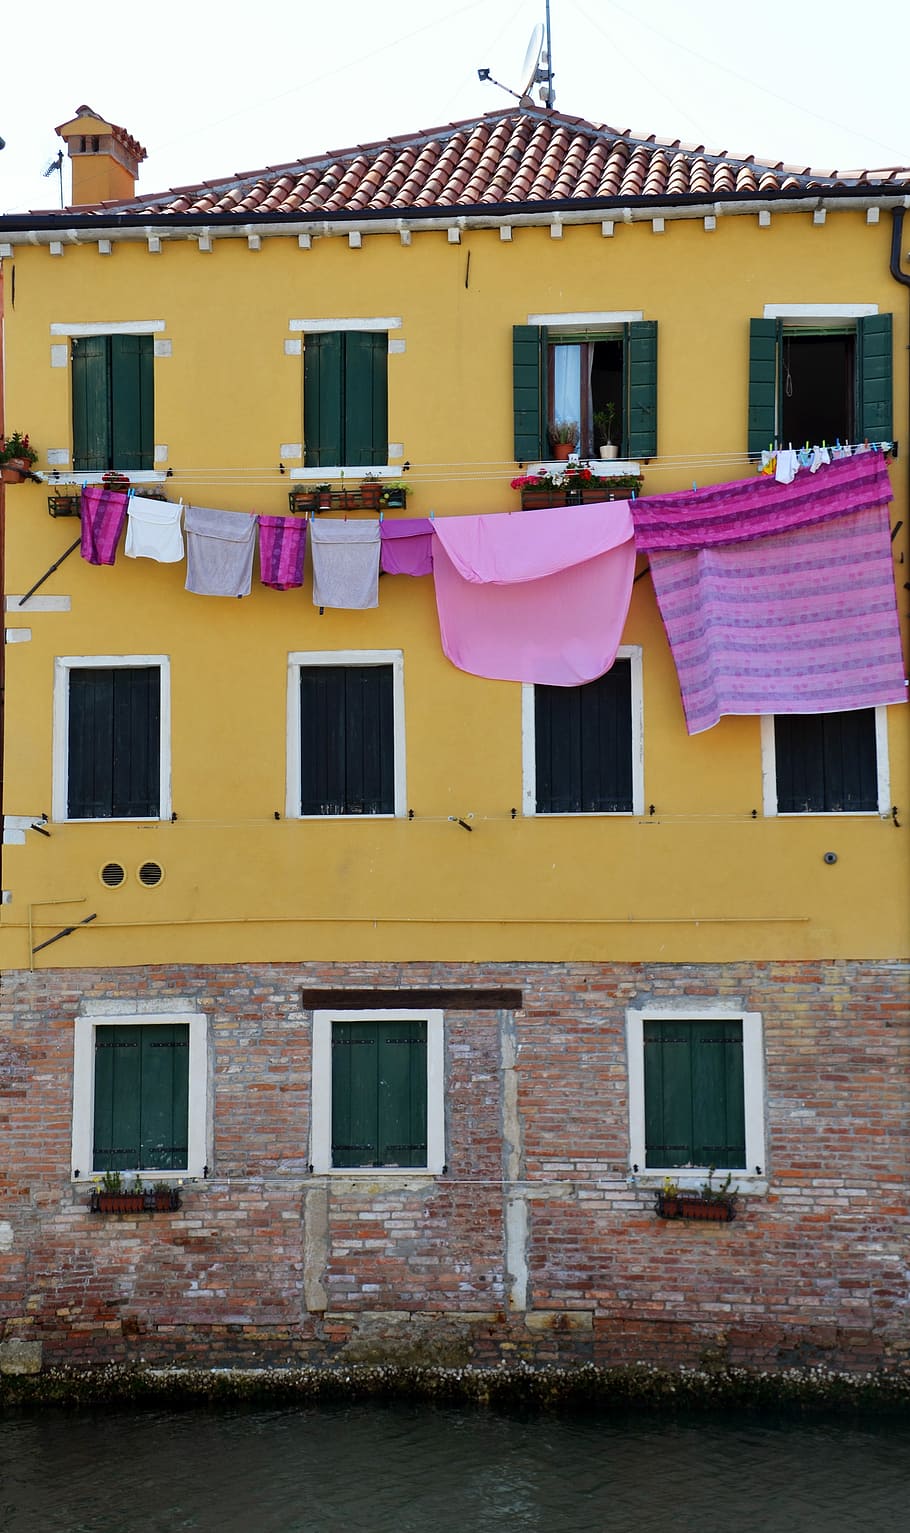 laundry, clothes line, house facade, purple, yellow, dry laundry, italy, venice, hang, dry